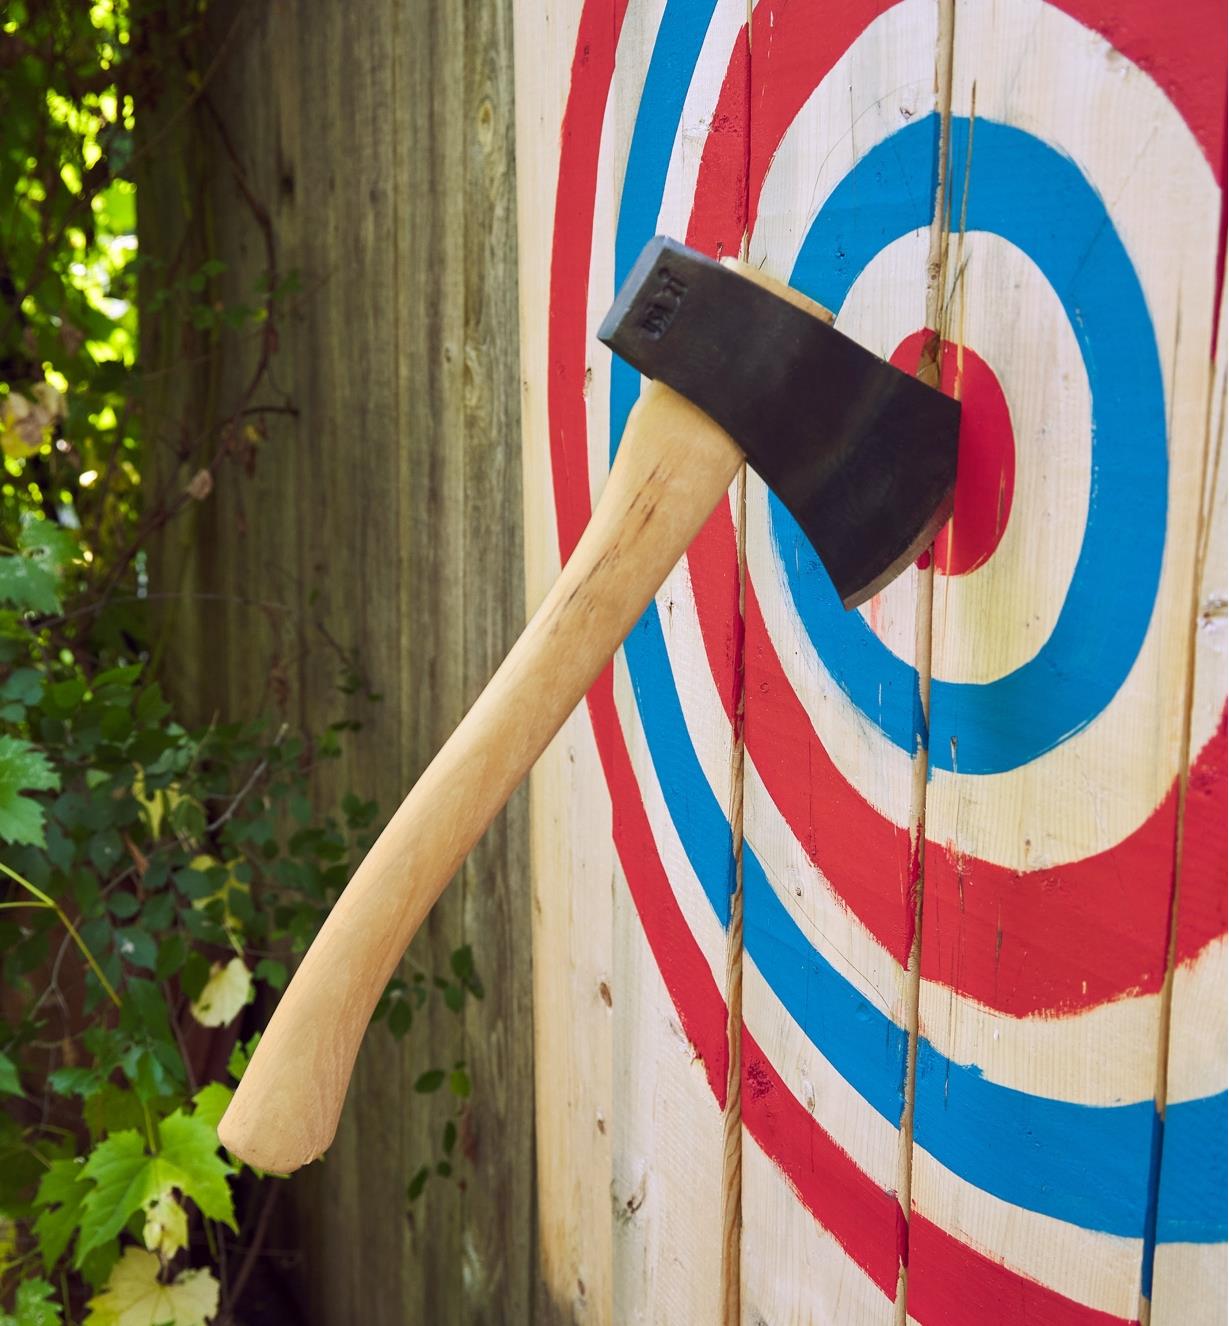 A hatchet embedded in the center of a target